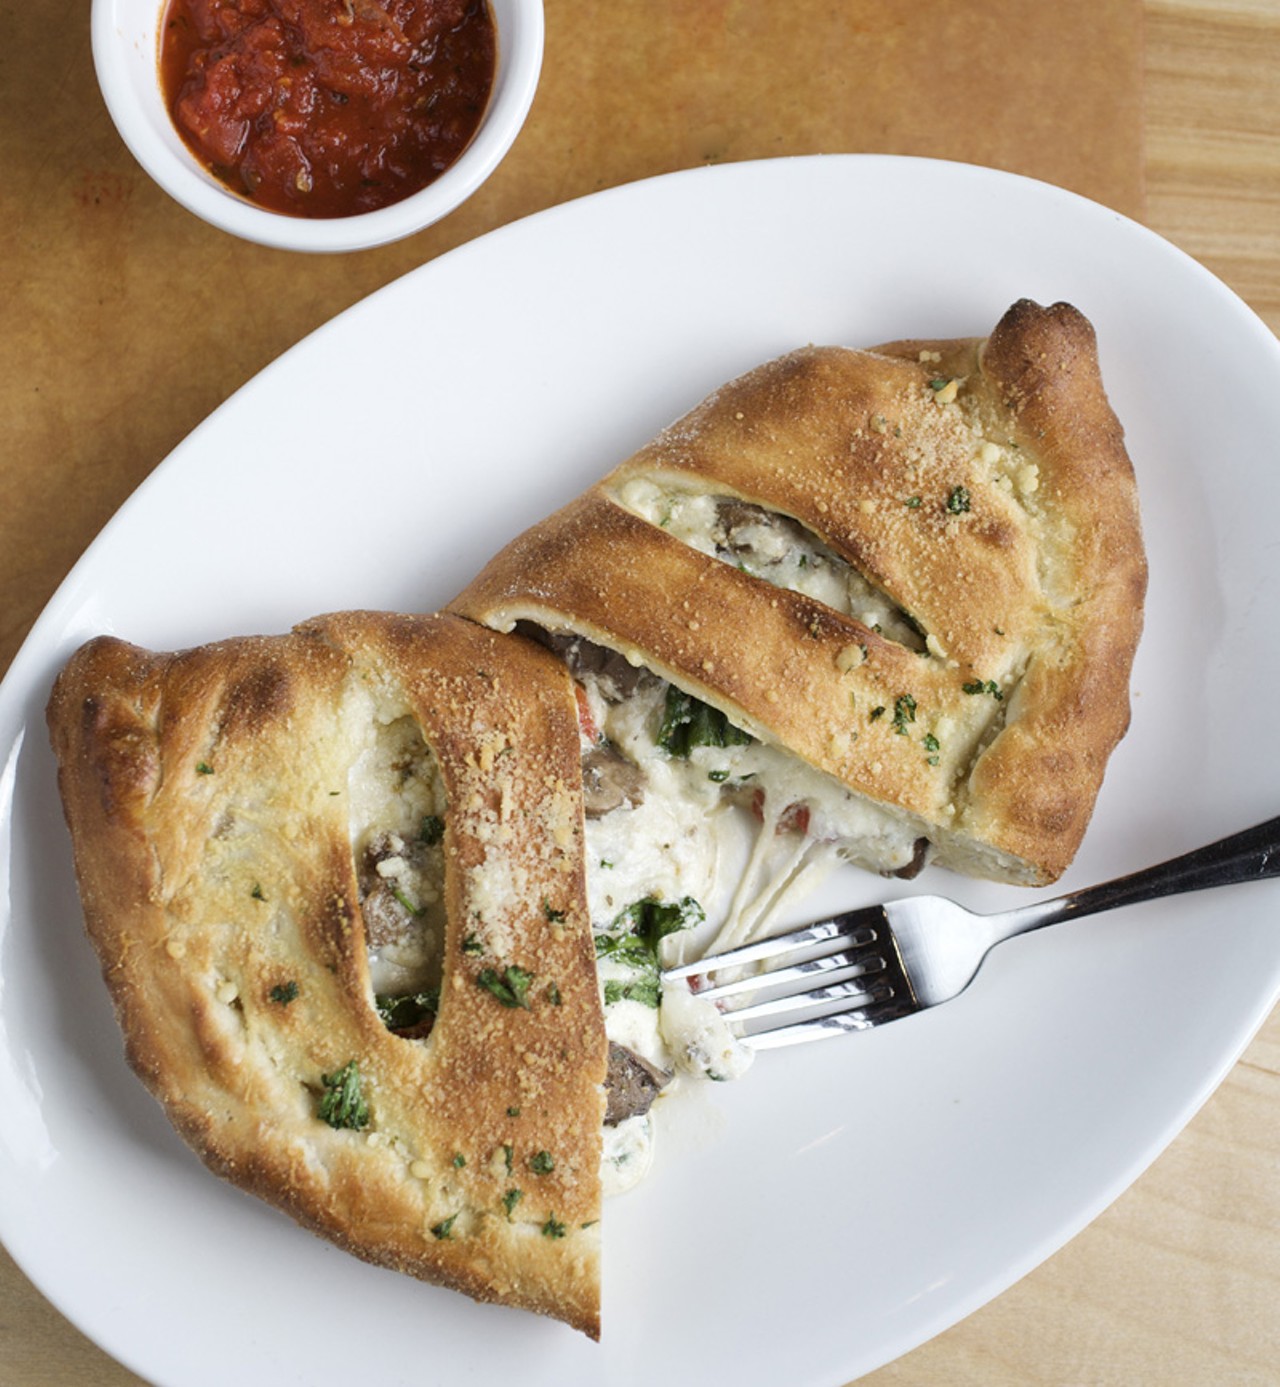 A Veggie Calzone - made with herb ricotta, wild mushrooms, spinach, roasted red peppers, caramelized onions, mozzerella and parmesan. Marinara sauce, on the side.